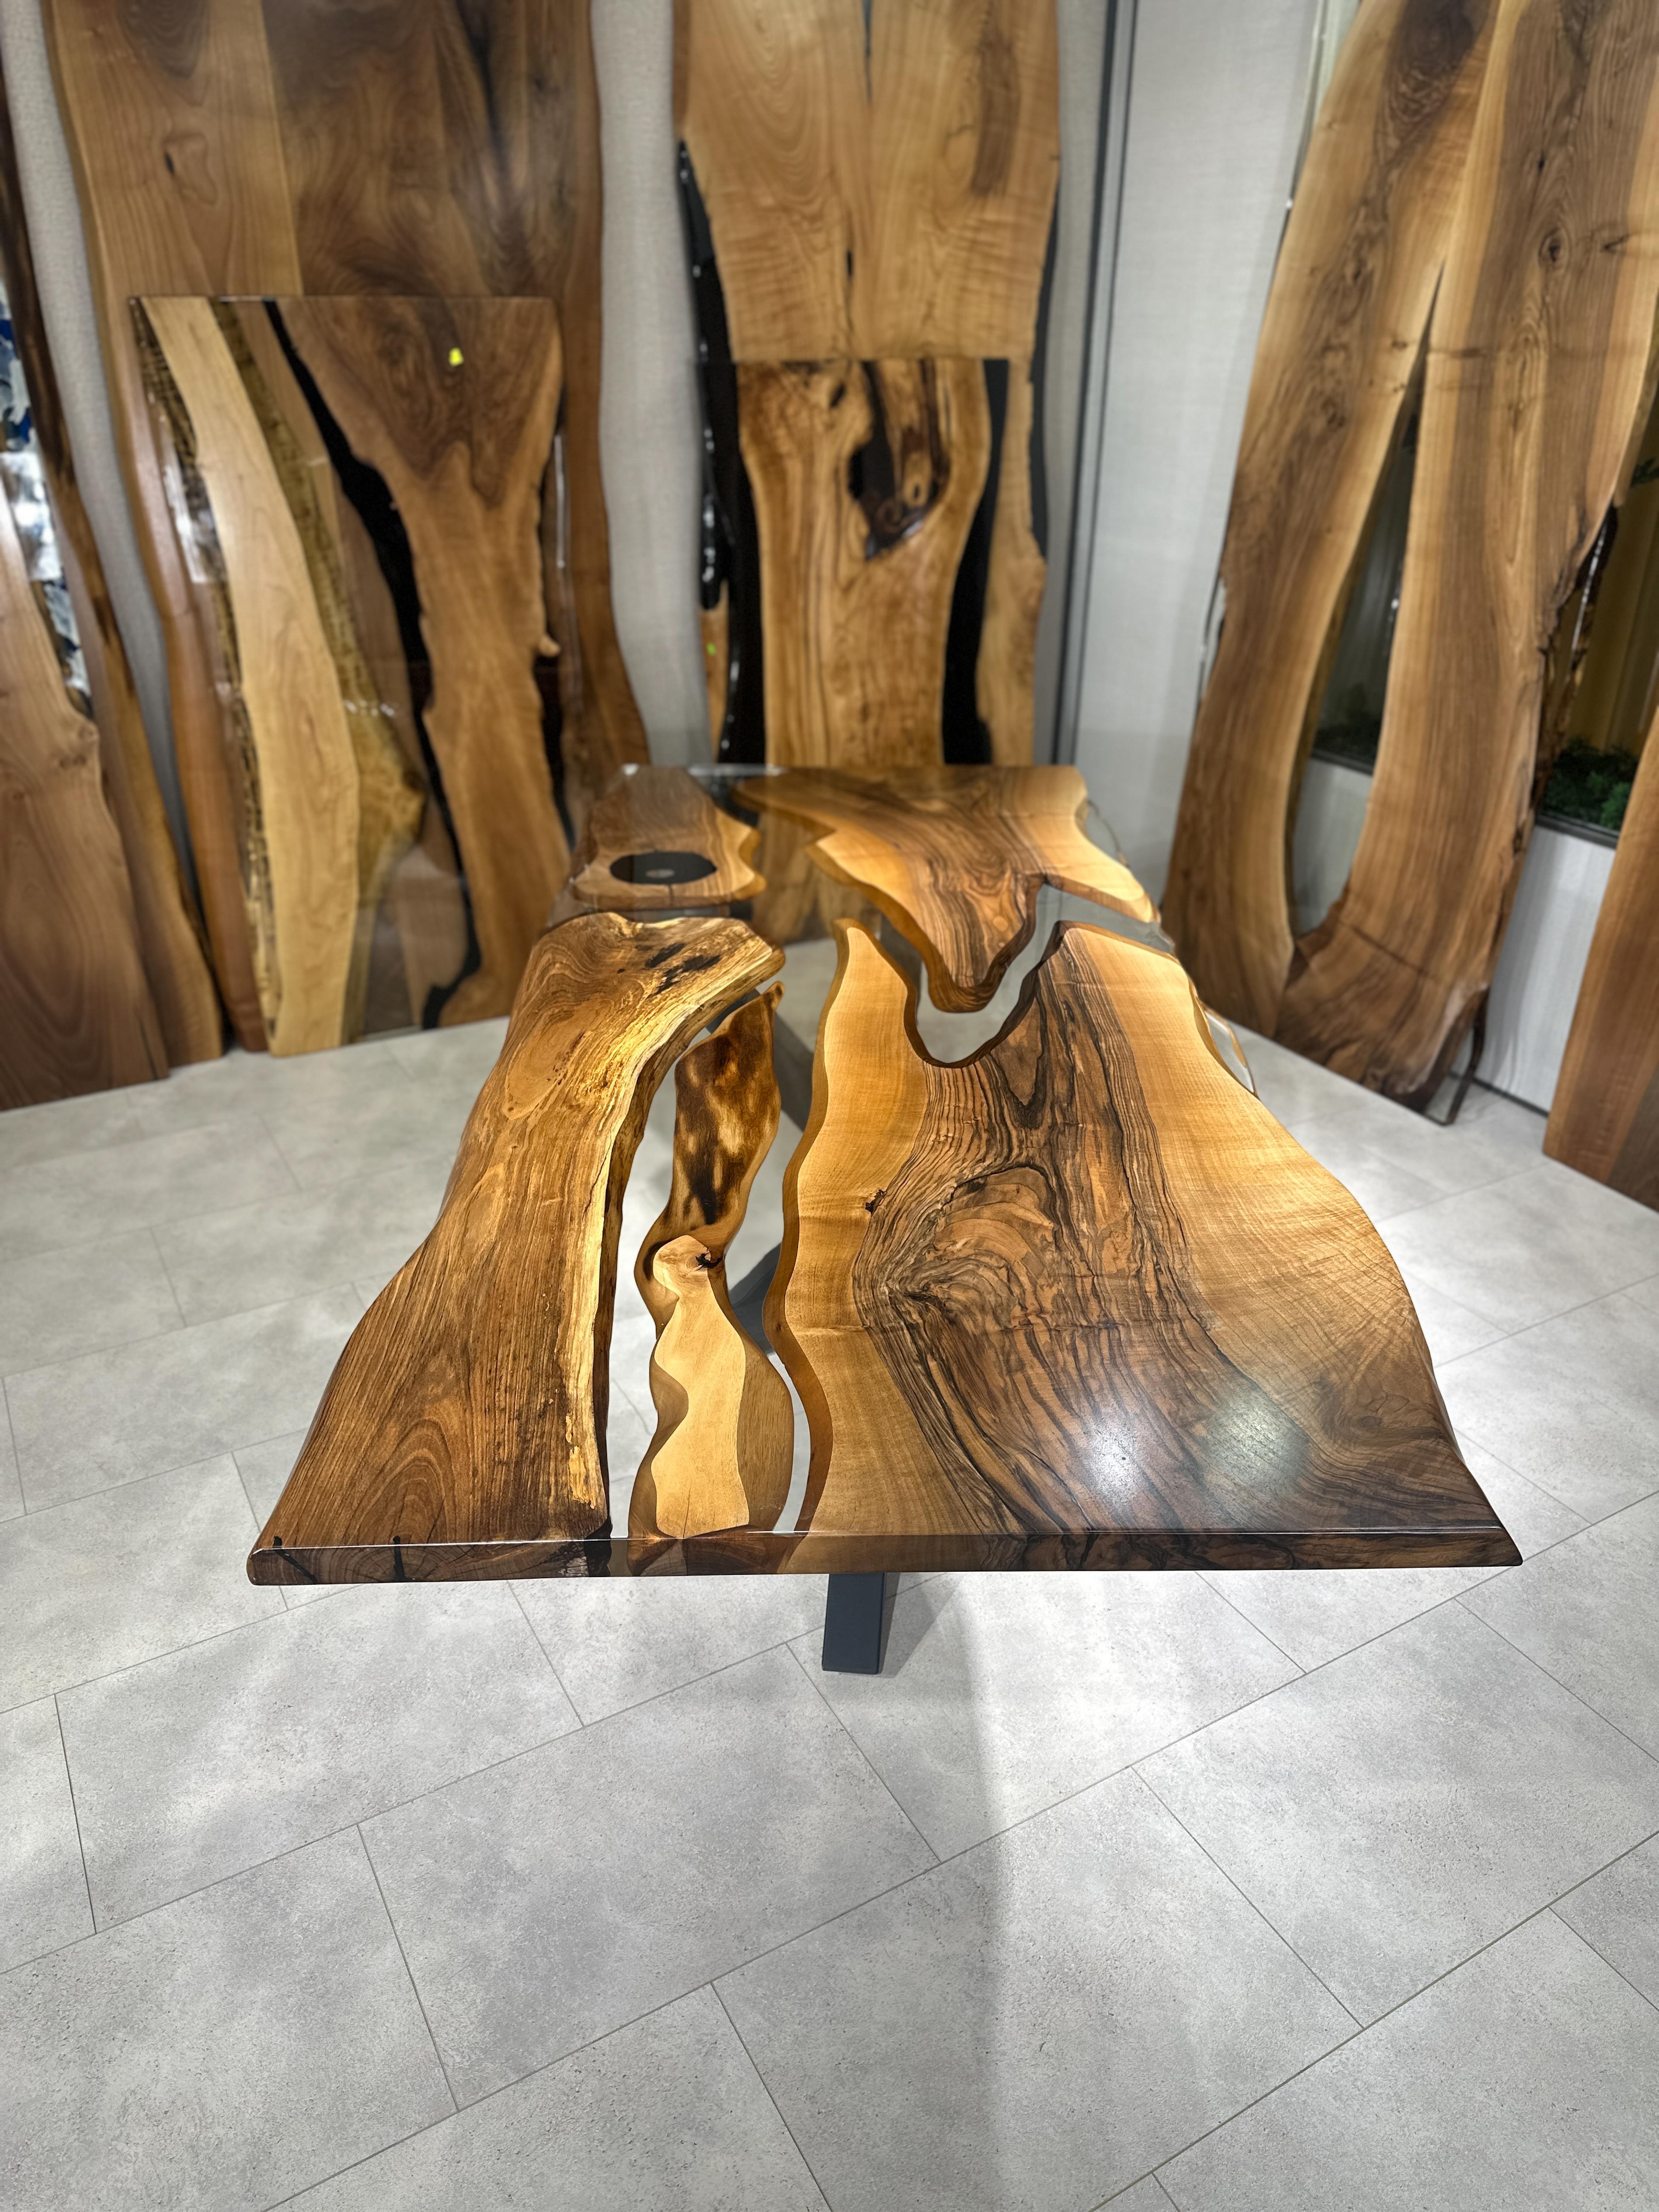 Walnut Live Edge Custom Clear Epoxy Resin Dining Table 

This table is made of 500 years old walnut wood. The grains and texture of the wood describe what a natural walnut woods looks like.
It can be used as a dining table or as a conference table.